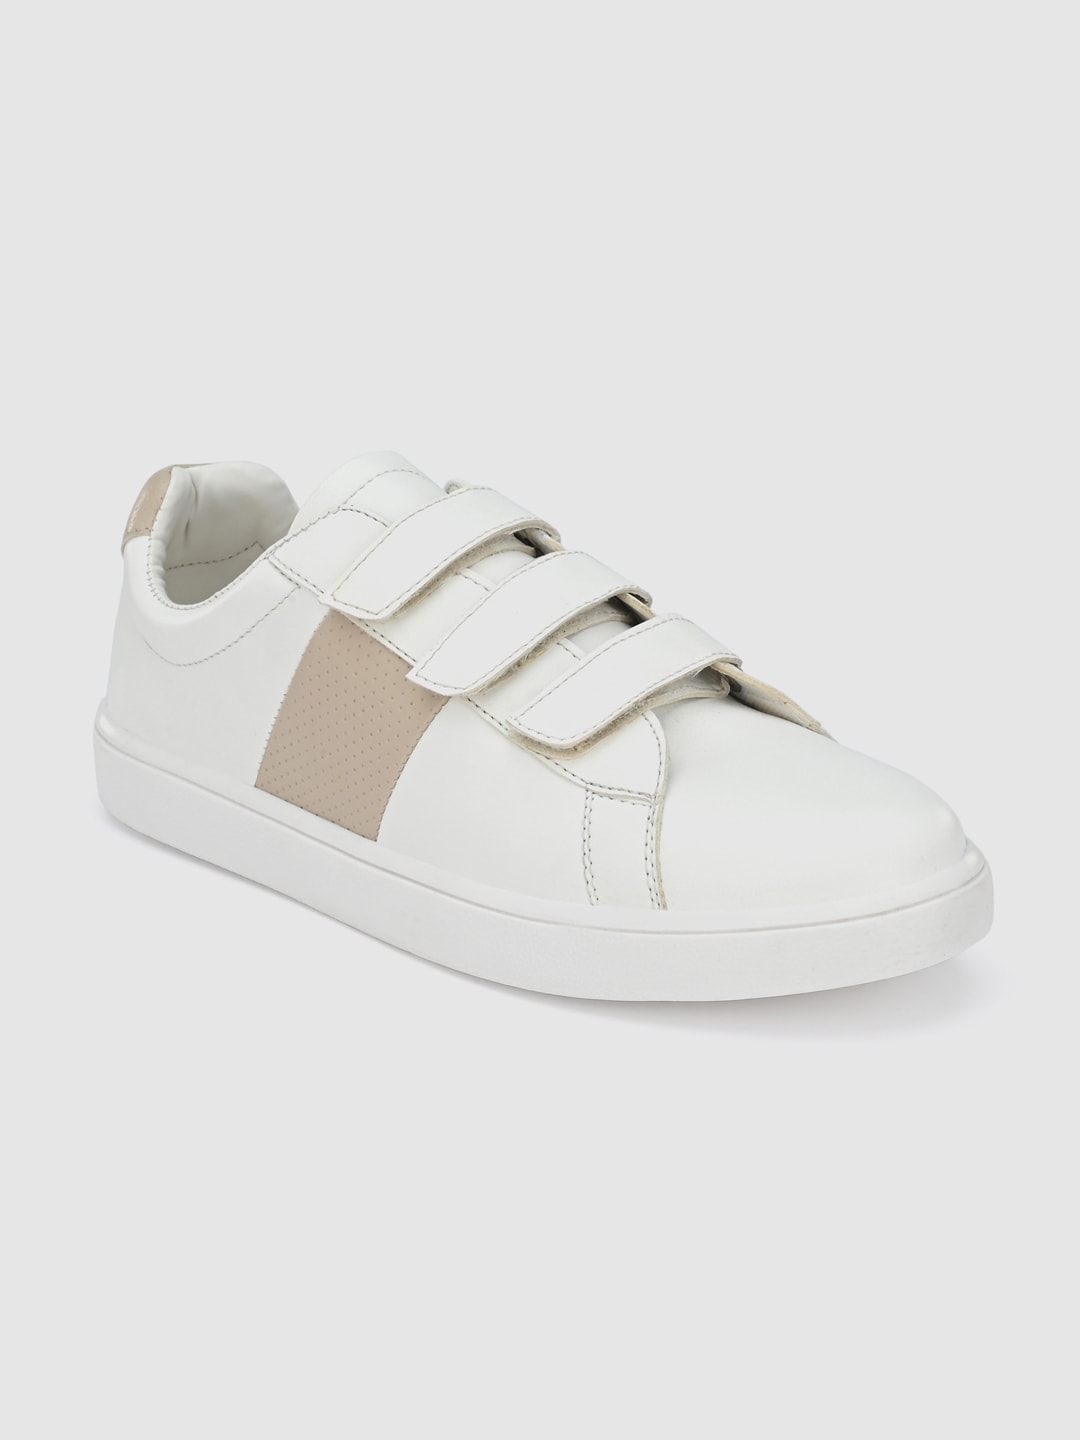 Buy The Roadster Lifestyle Co Women White Solid Sneakers - Casual Shoes ...